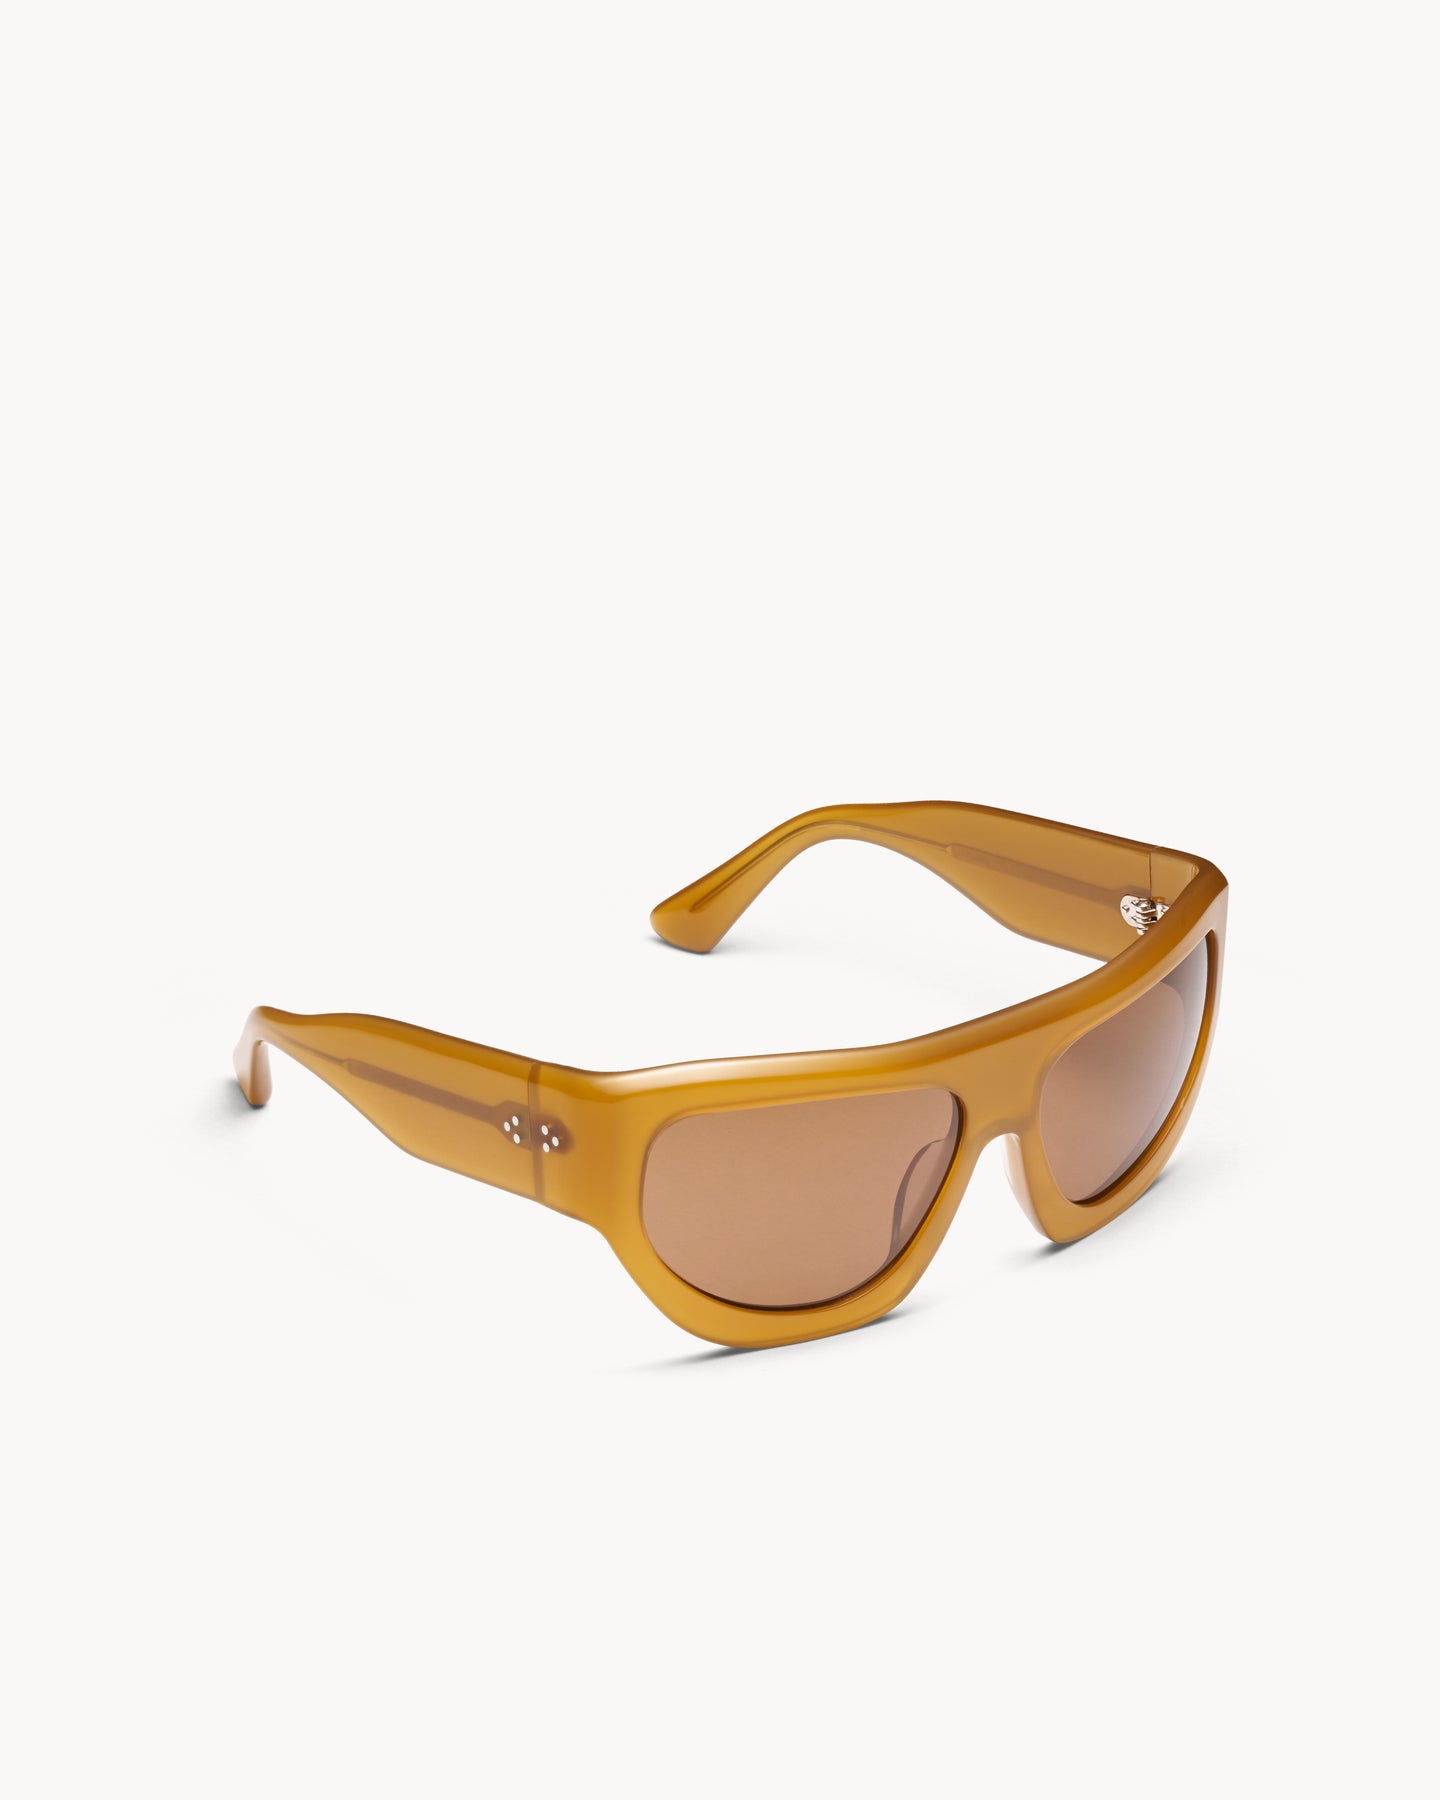 Port Tanger Dost Sunglasses in Yellow Ochra Acetate and Tobacco Lenses 2